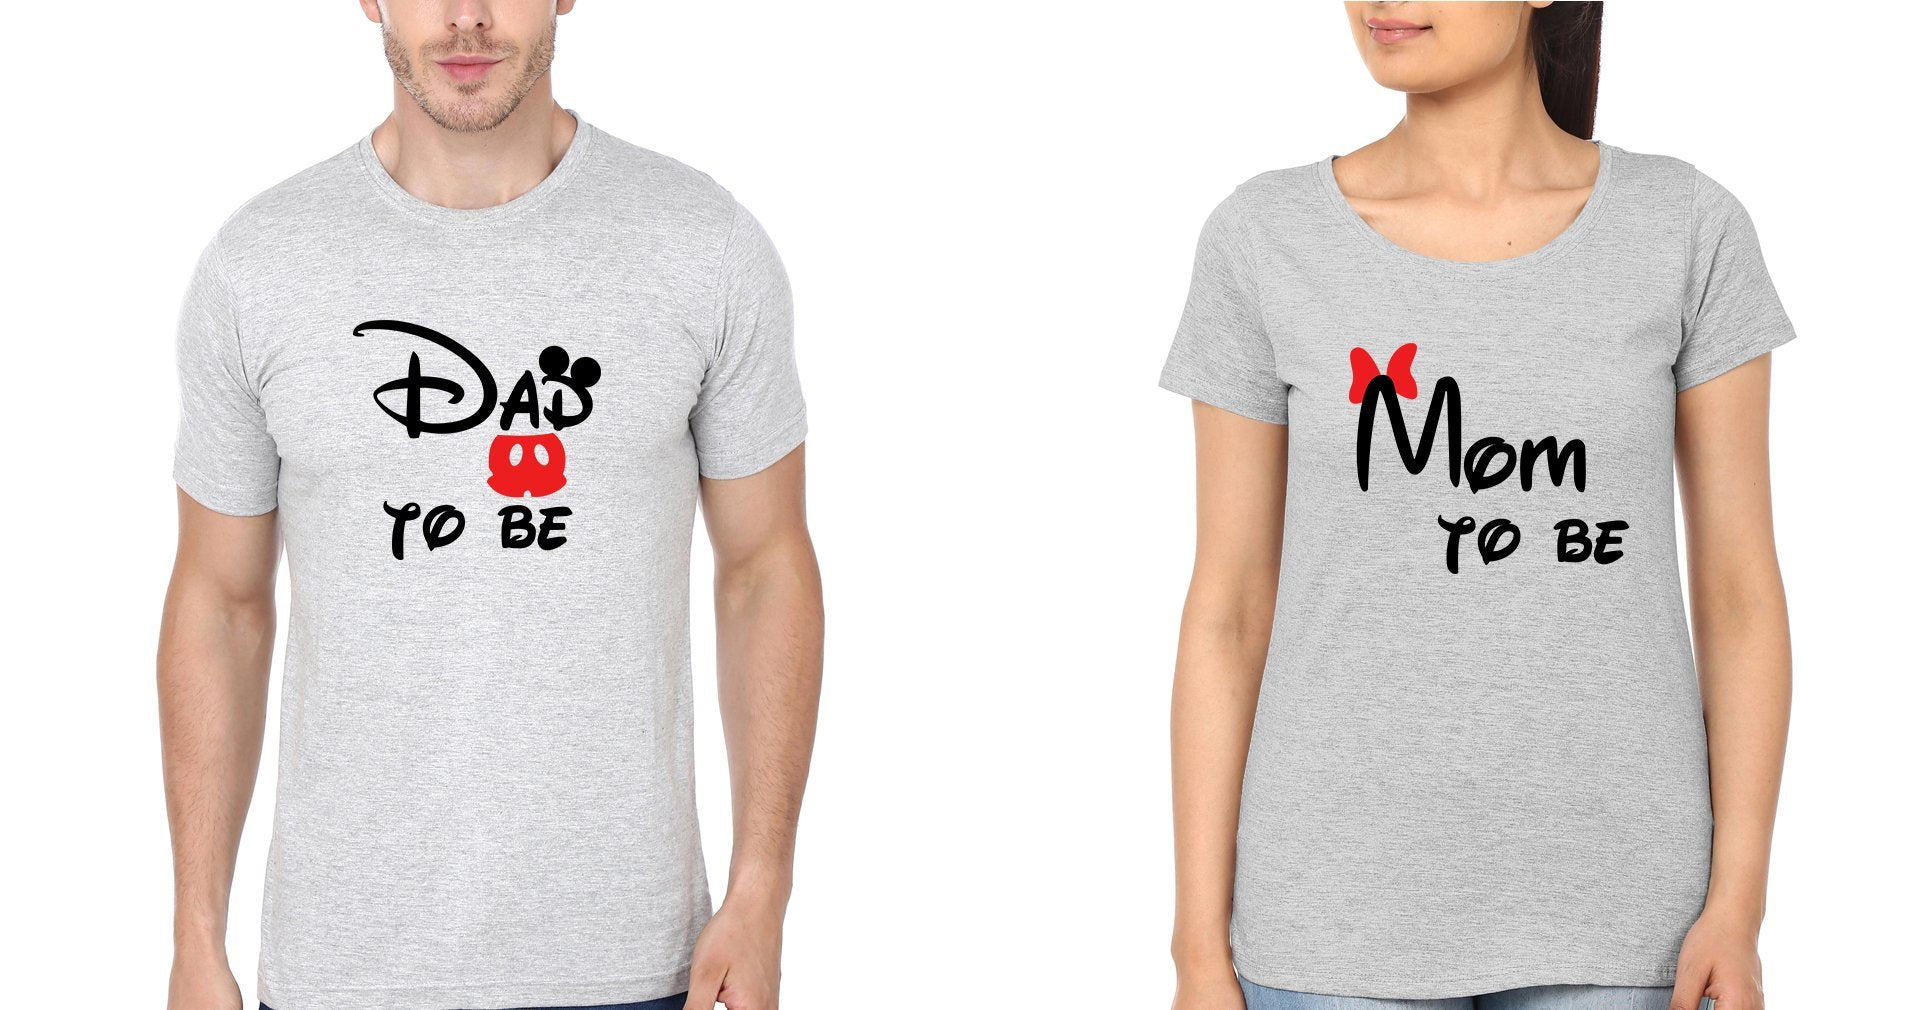 Dad To Be, Mom To Be Couple Half Sleeves T-Shirts -FunkyTees